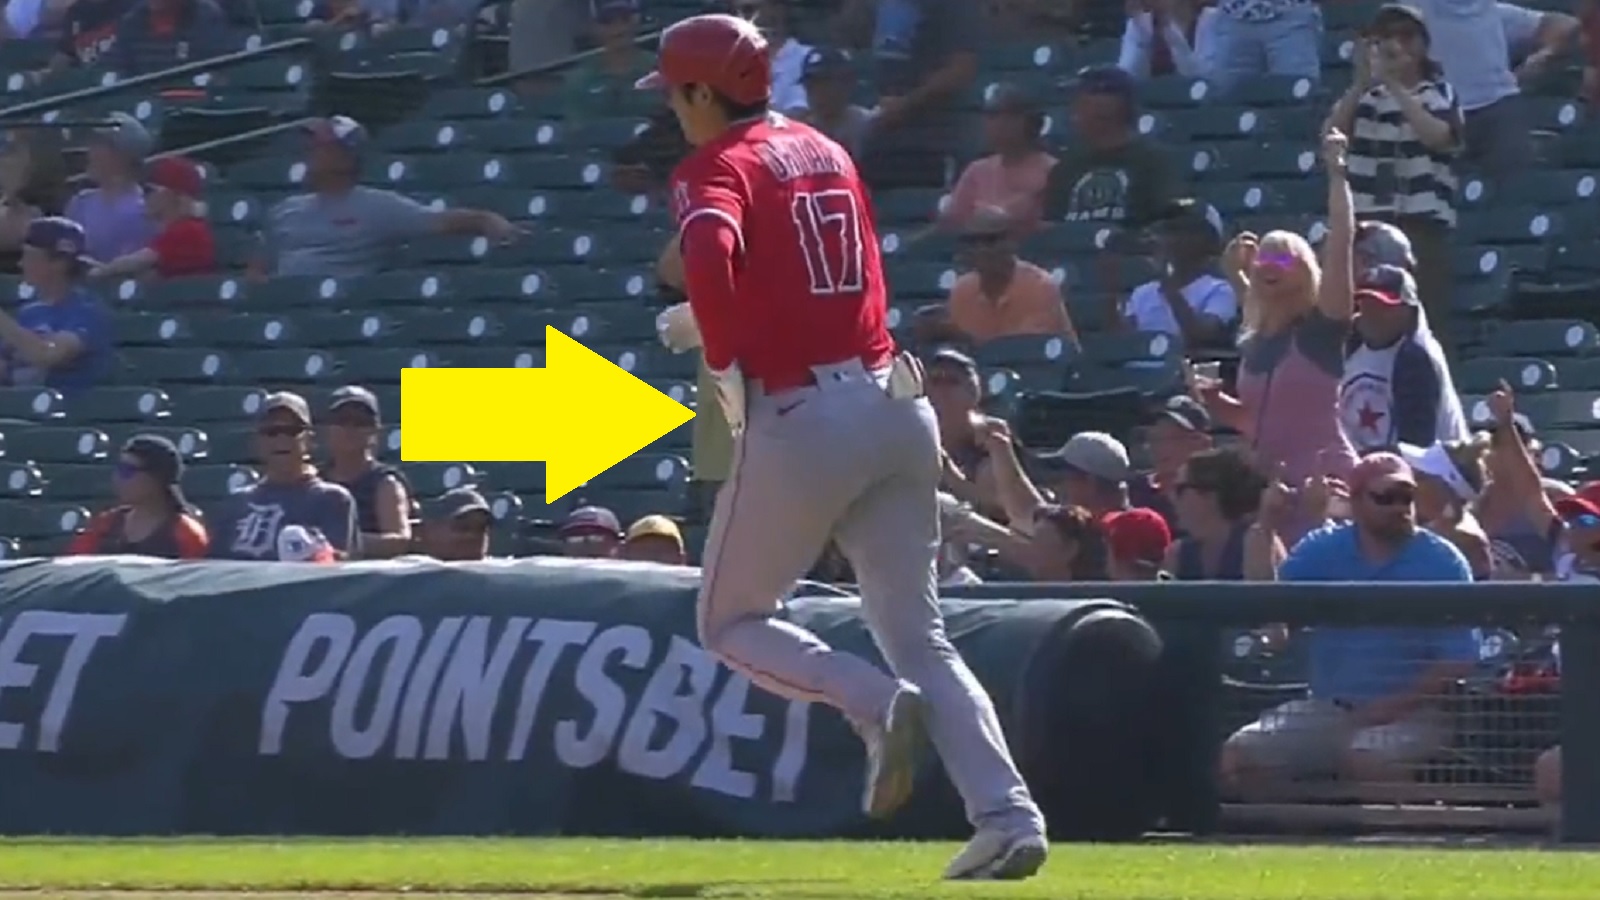 MLB Home Run Leader Shohei Ohtani Is Swinging at Ludicrous Pitches